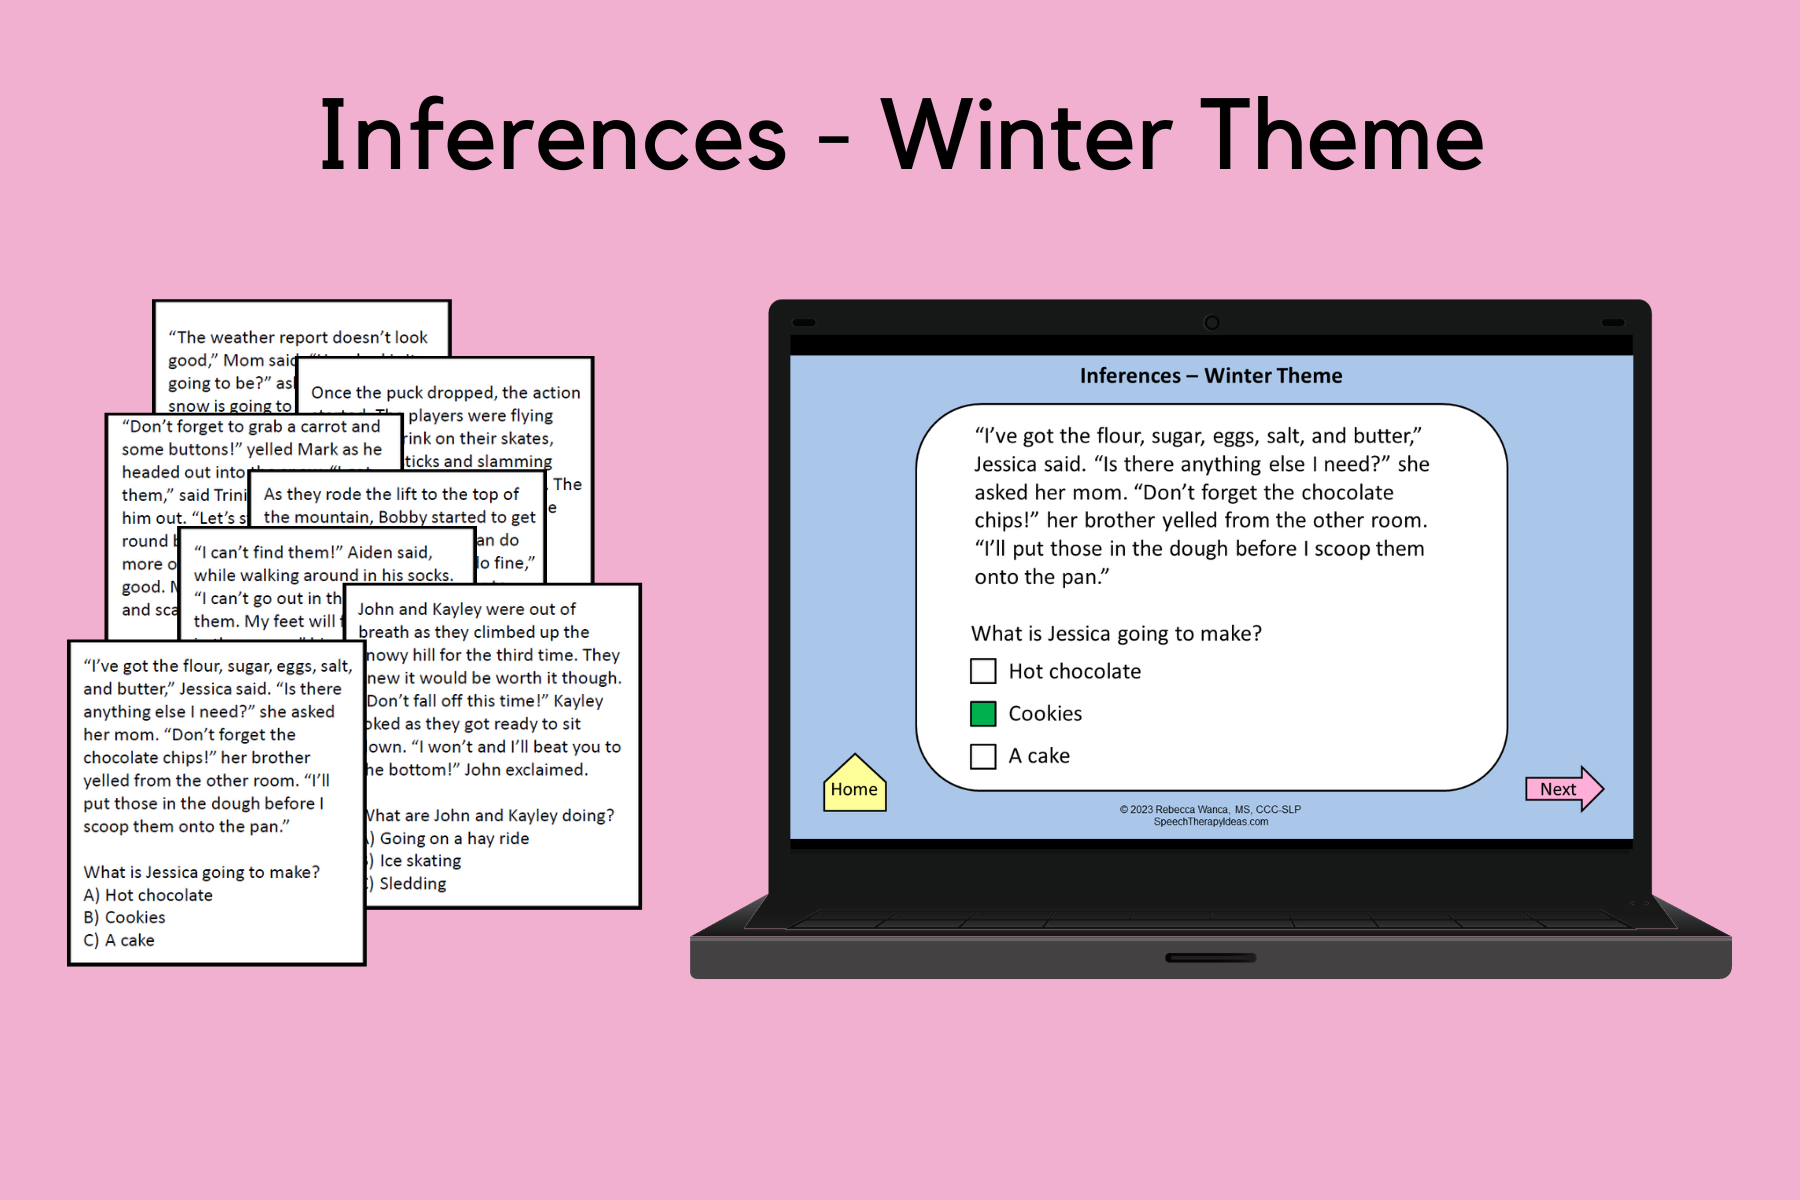 Inferences – Winter Theme